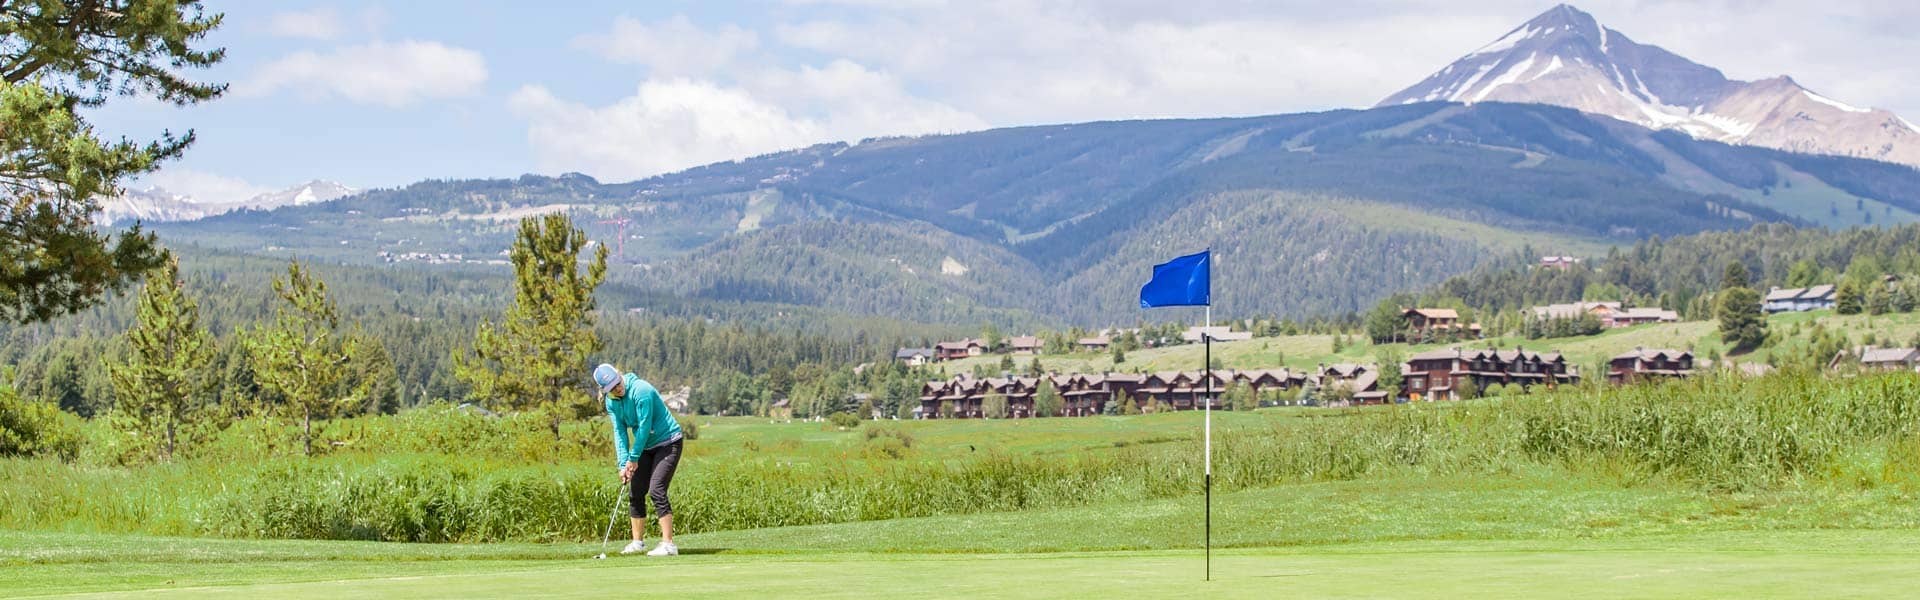 Woman putting with Lone Peak in the background